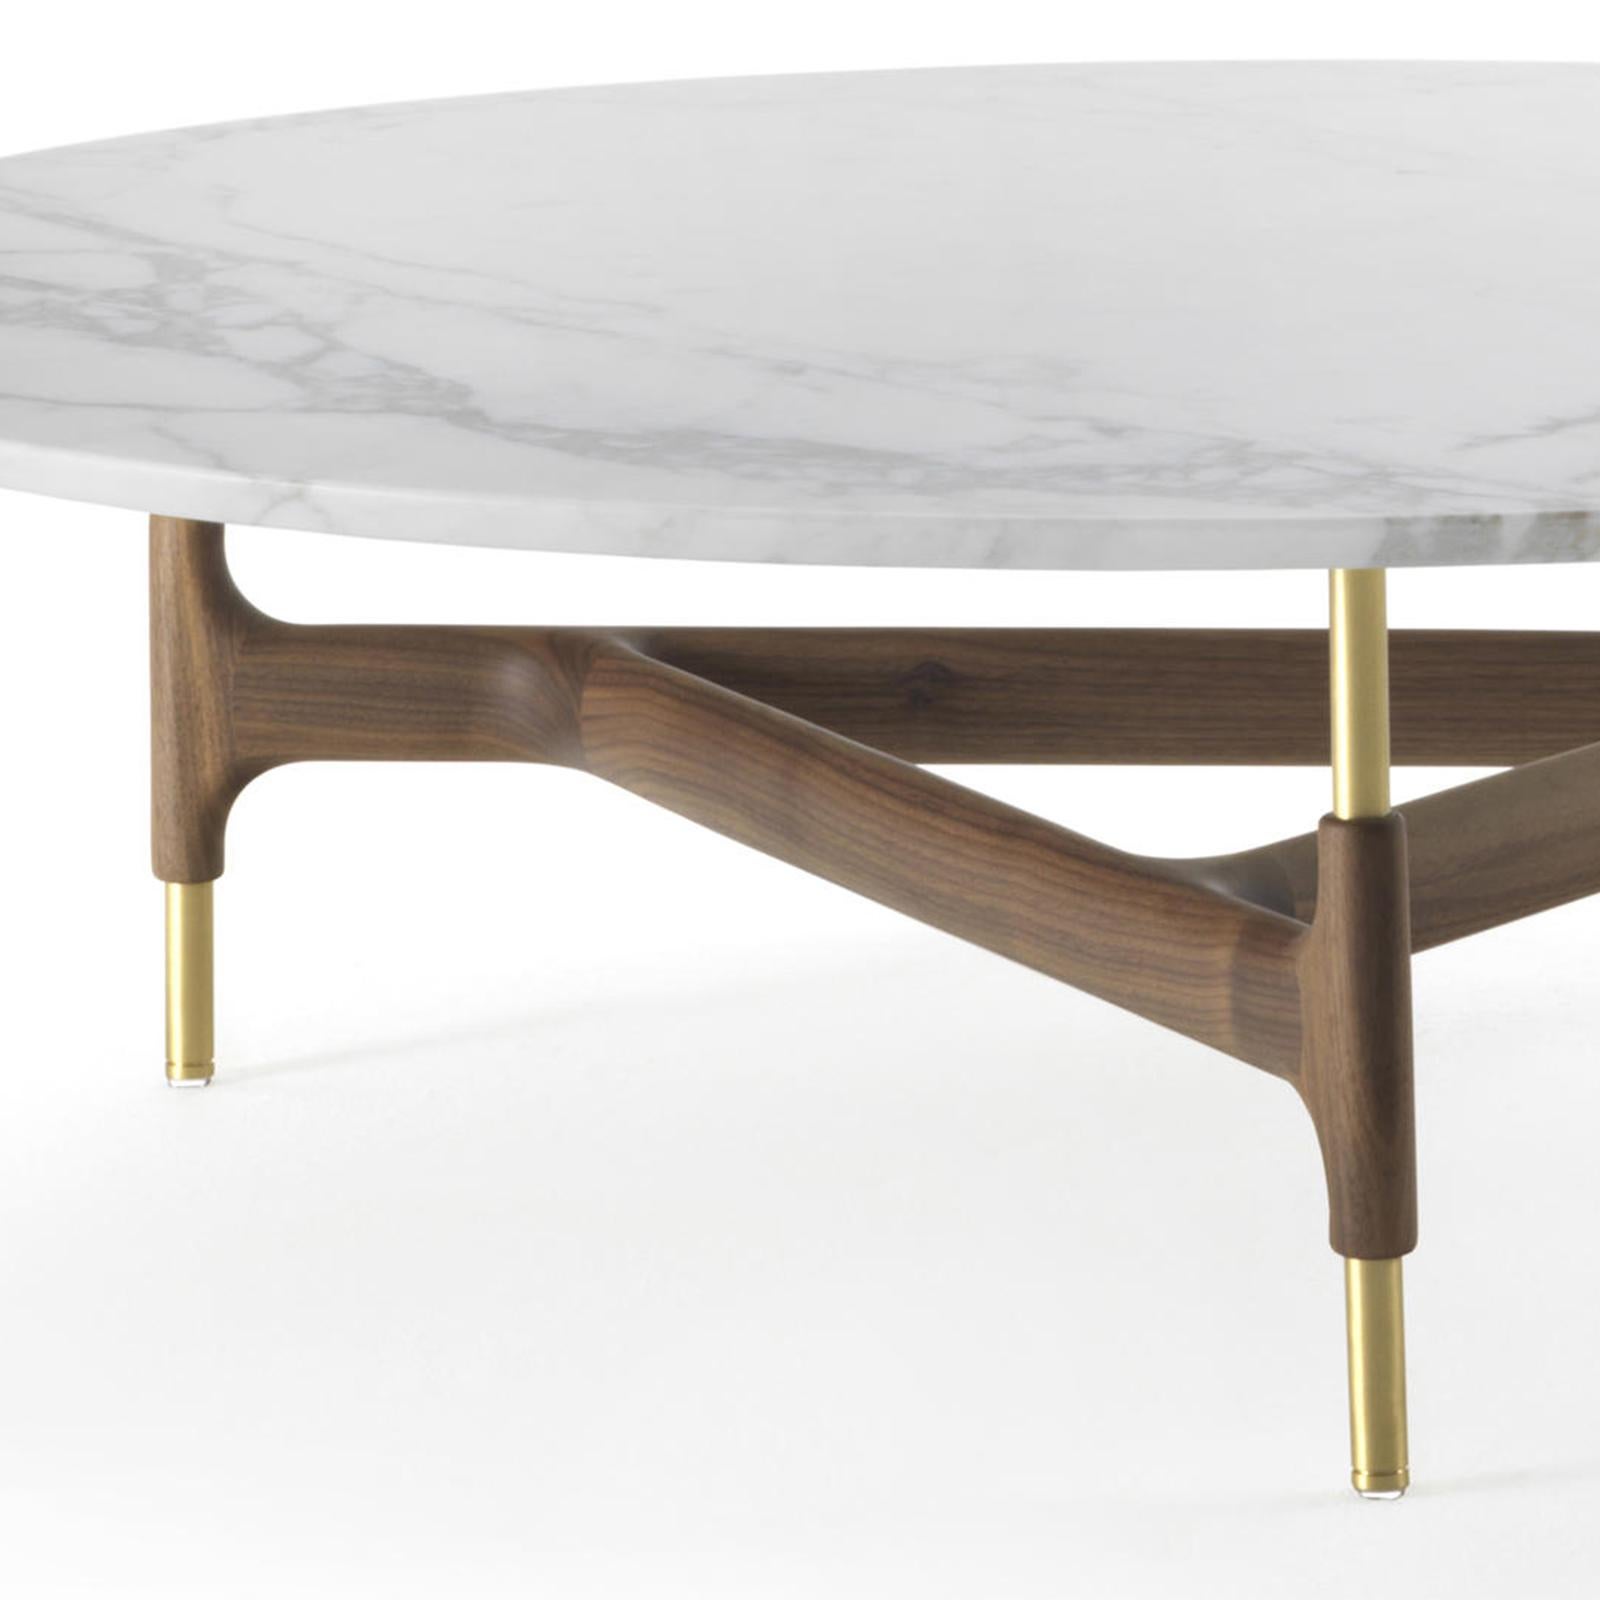 Coffee table paloma marble with hand-crafted
solid walnut base with steel feet in brass finish.
With white calacatta oro marble top.
Also available with black marble top or emperador
marble top, on request.